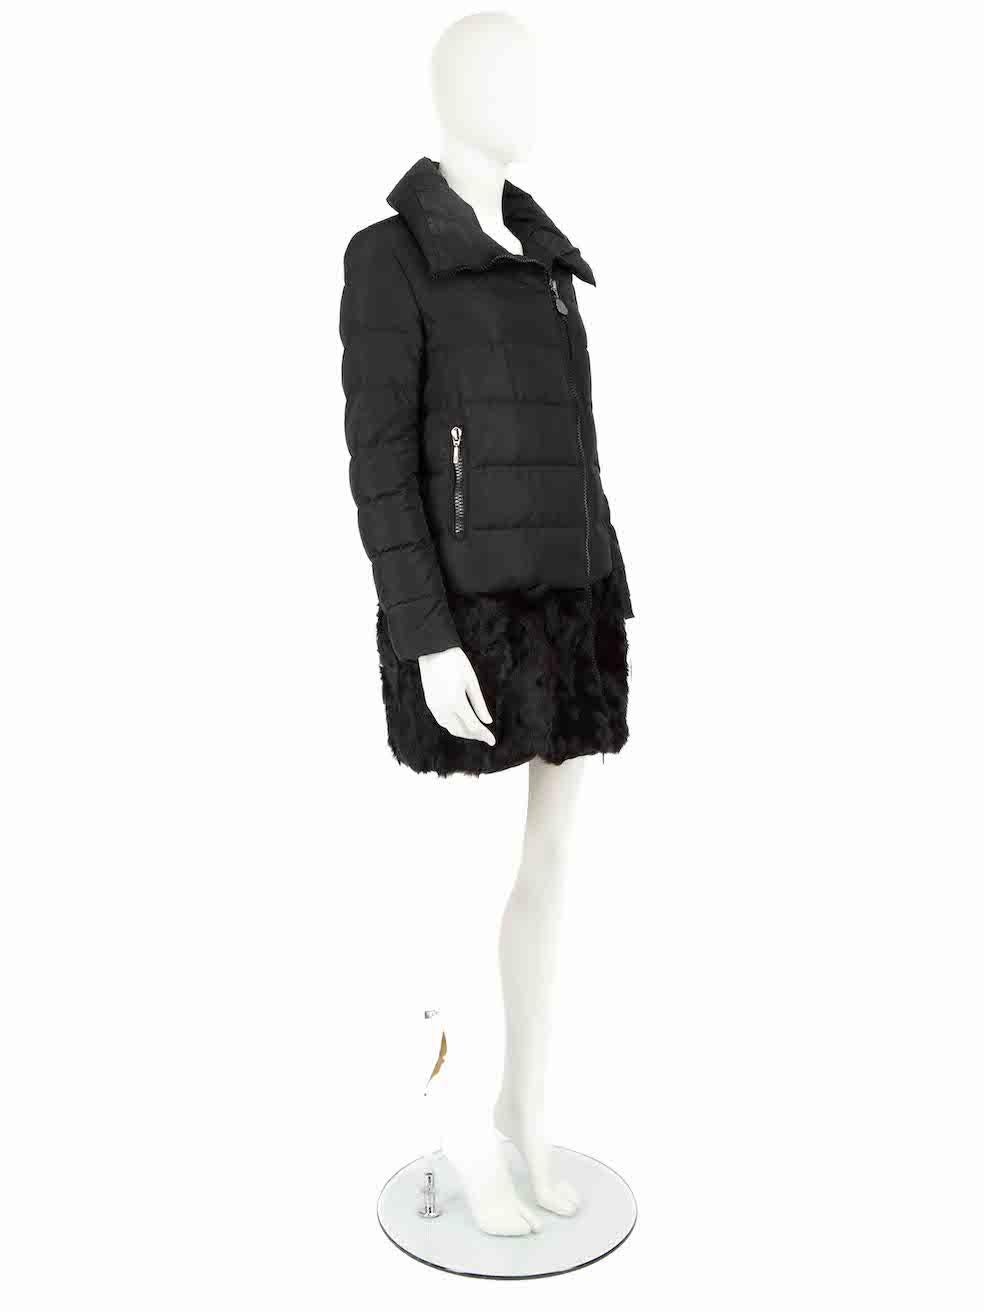 CONDITION is Good. General wear to coat is evident. Moderate signs of wear, particularly at the collar and cuffs where clear discolouration can be seen on this used Moncler designer resale item.
 
Details
Black
Polyester
Down puffer coat
Fur trim